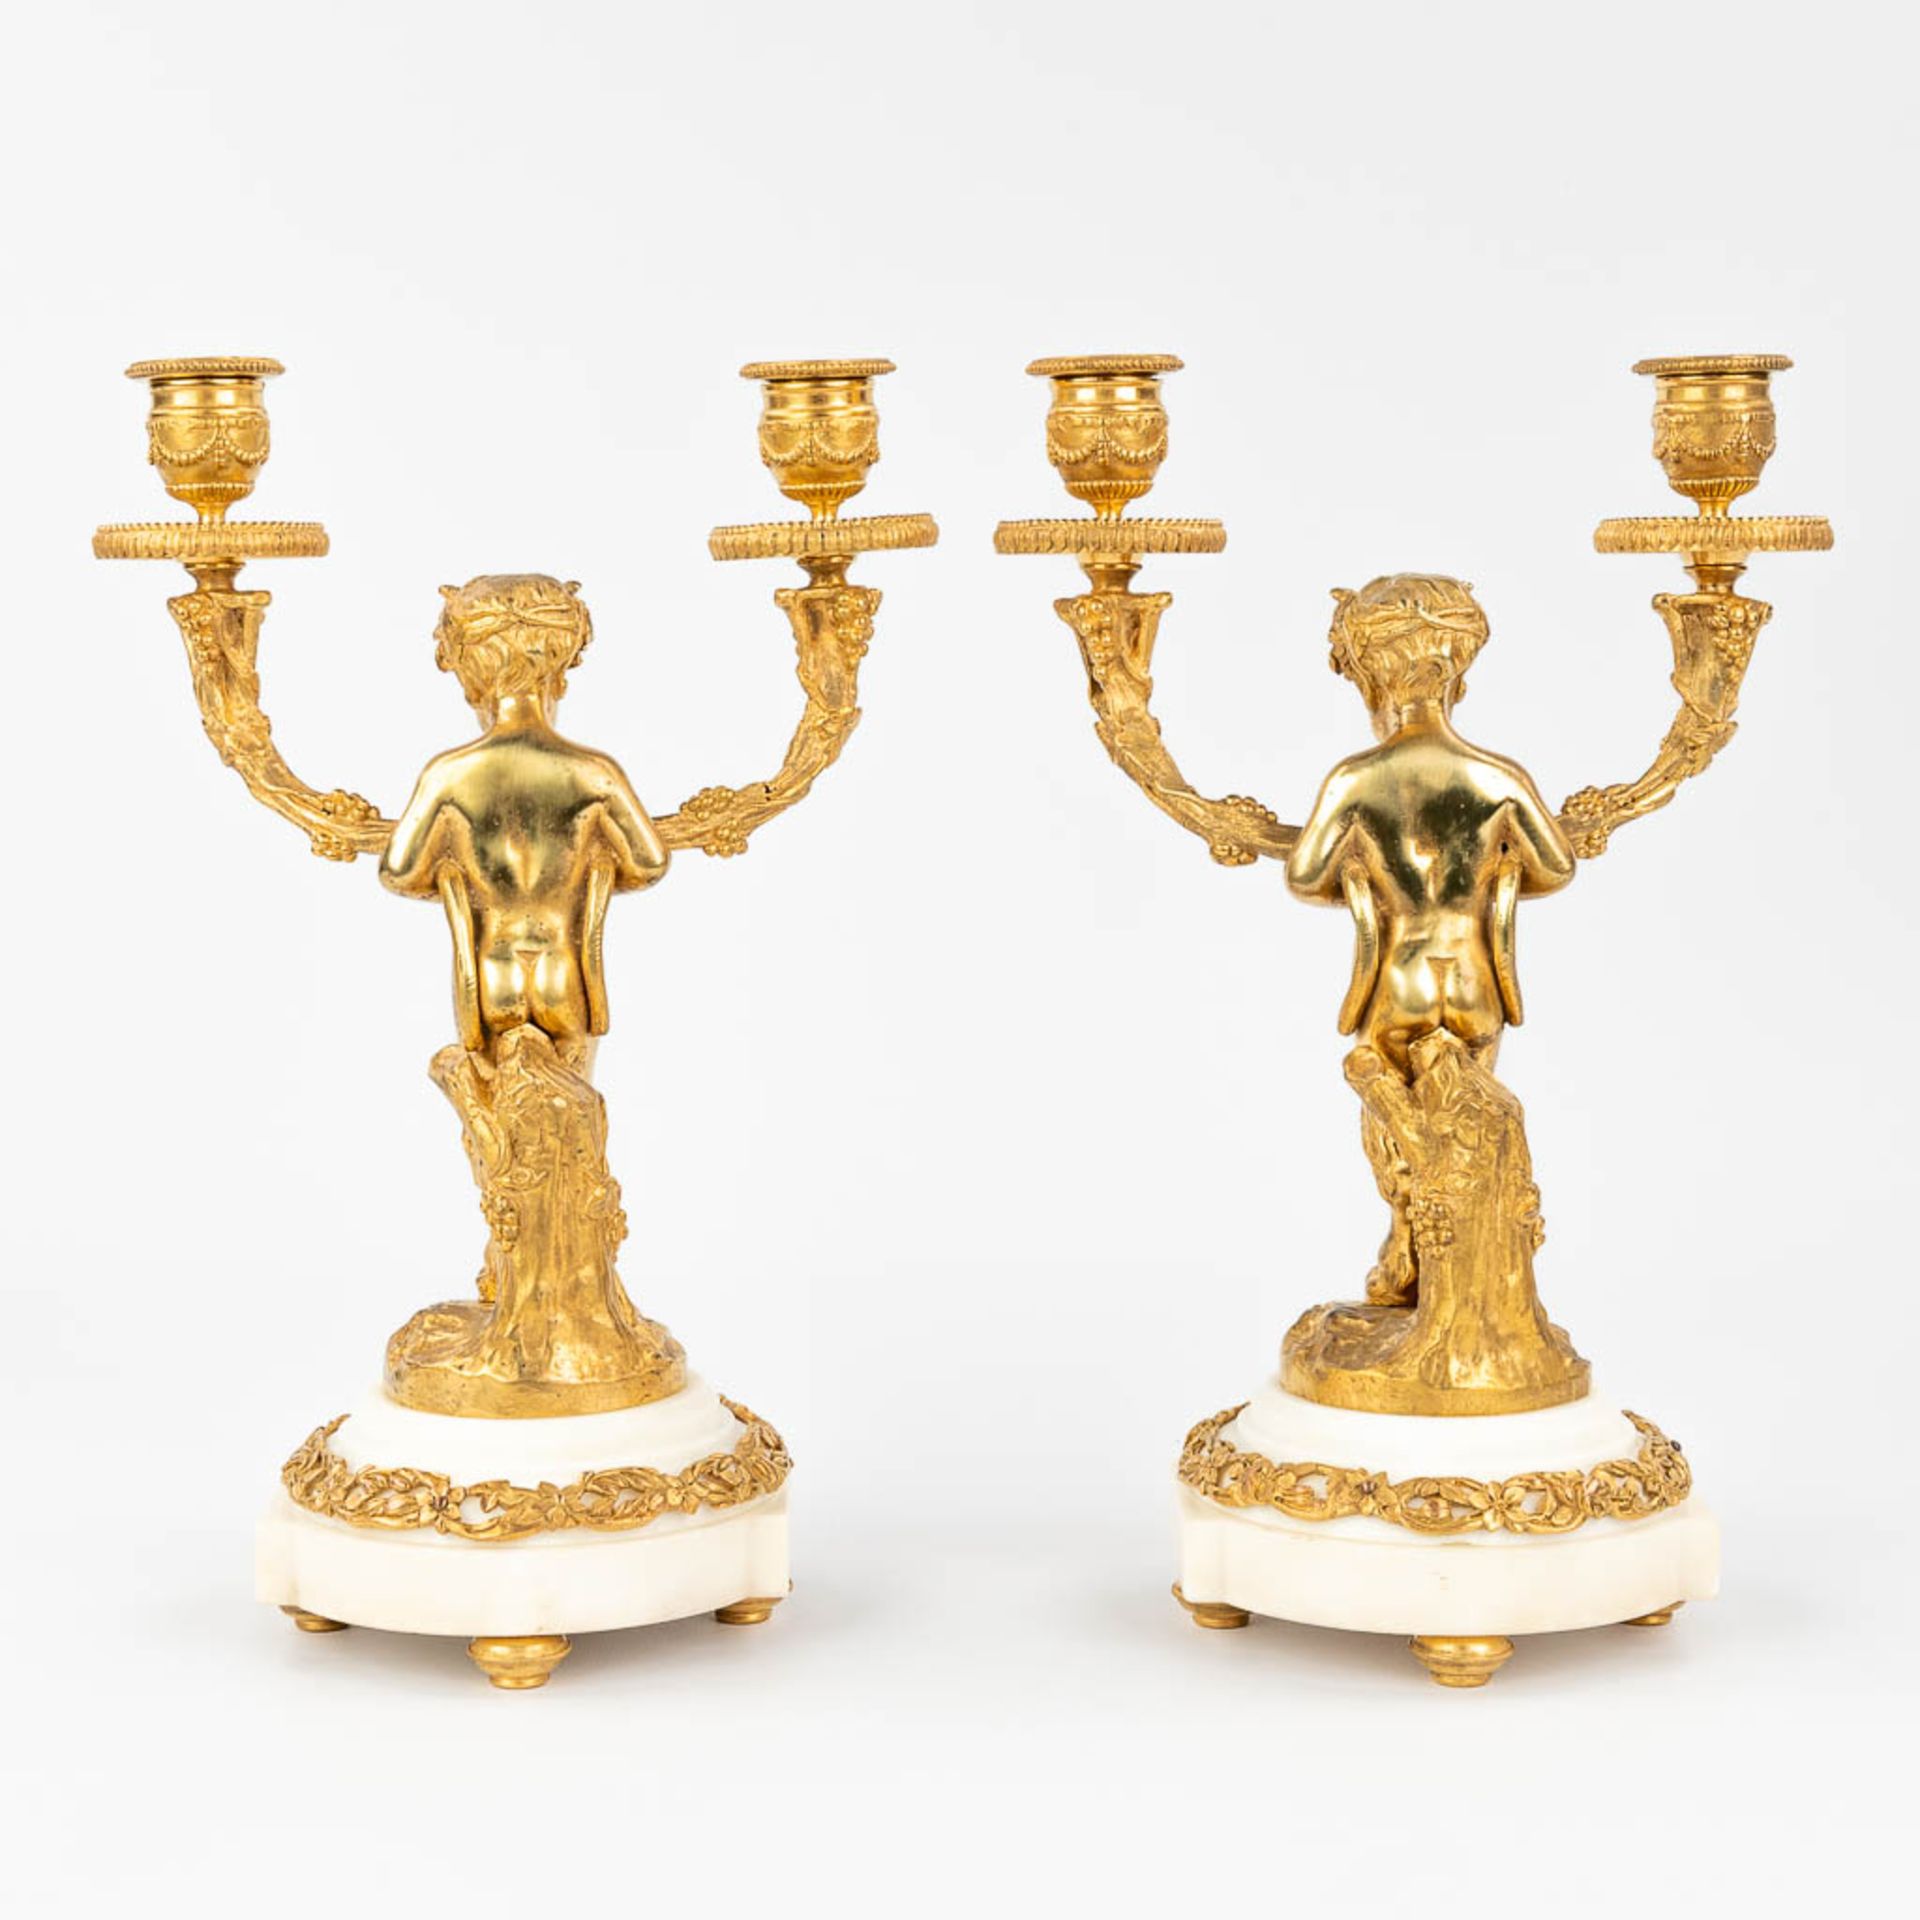 A pair of candelabra with Satyr figurines, made of gold-plated bronze. (13 x 21 x 30,5cm) - Bild 4 aus 13